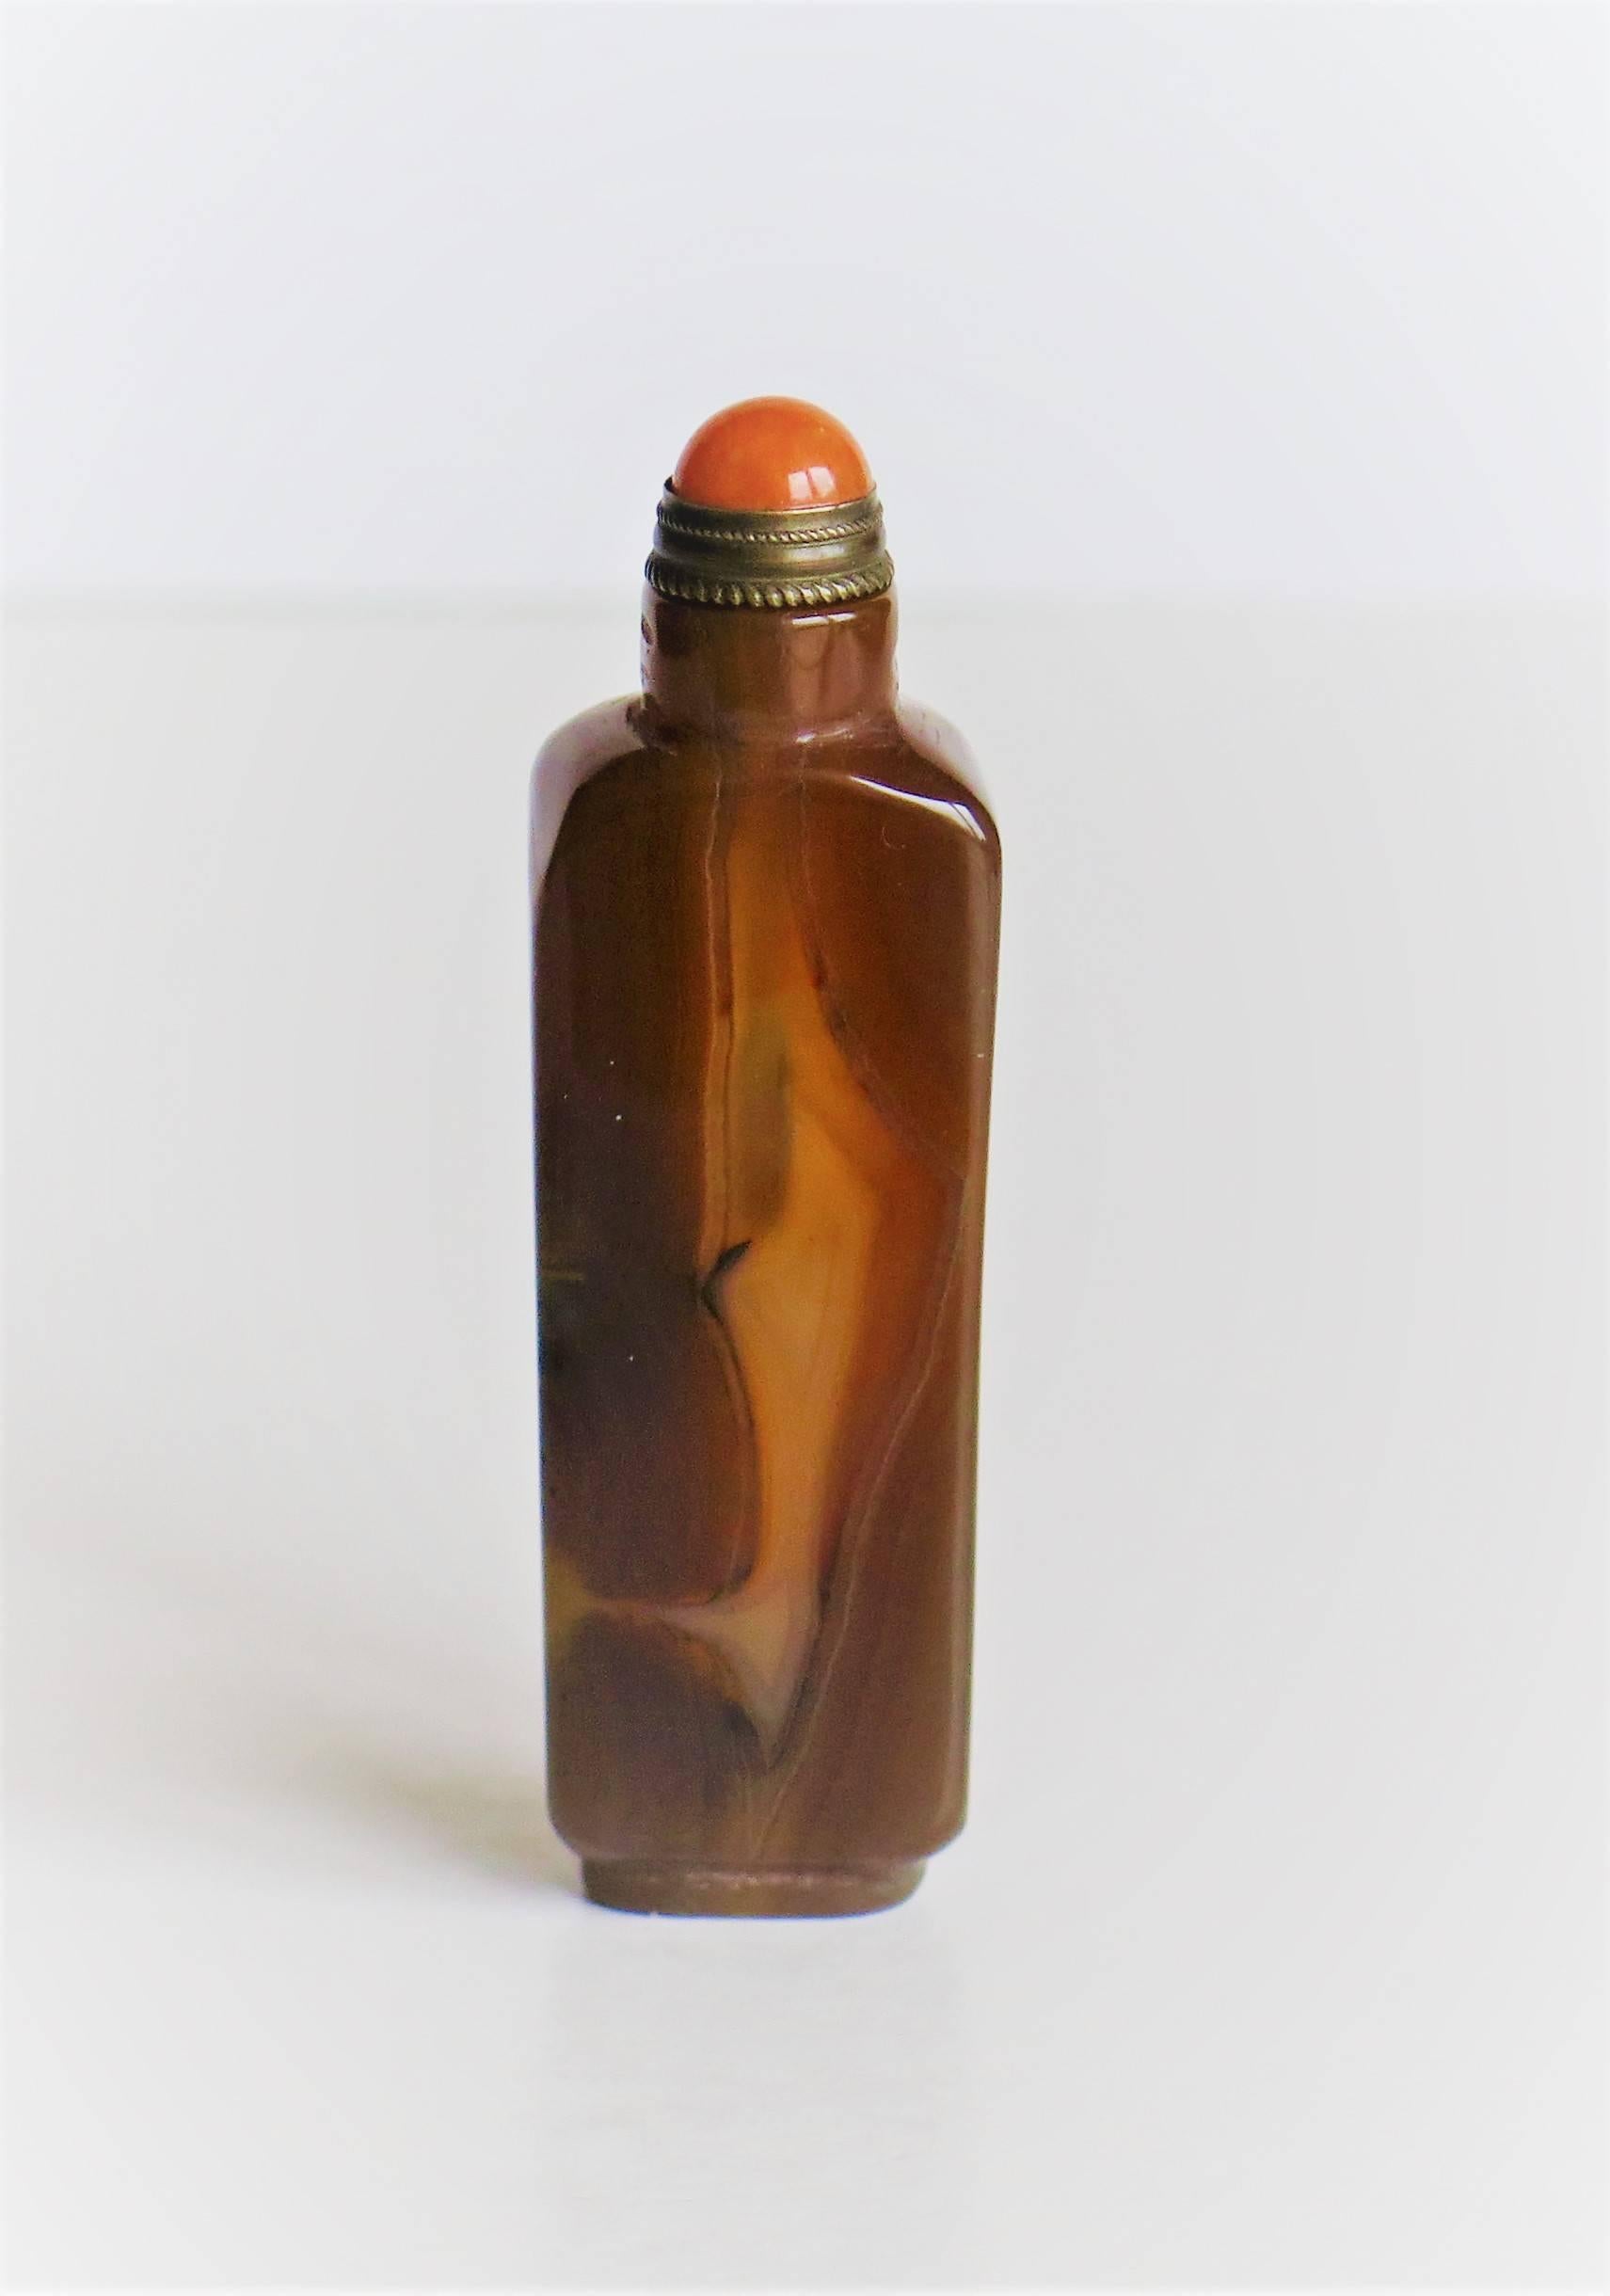 Qing Chinese Snuff Bottle, Natural Jade, Orange Stone Stopper and Spoon, circa 1930